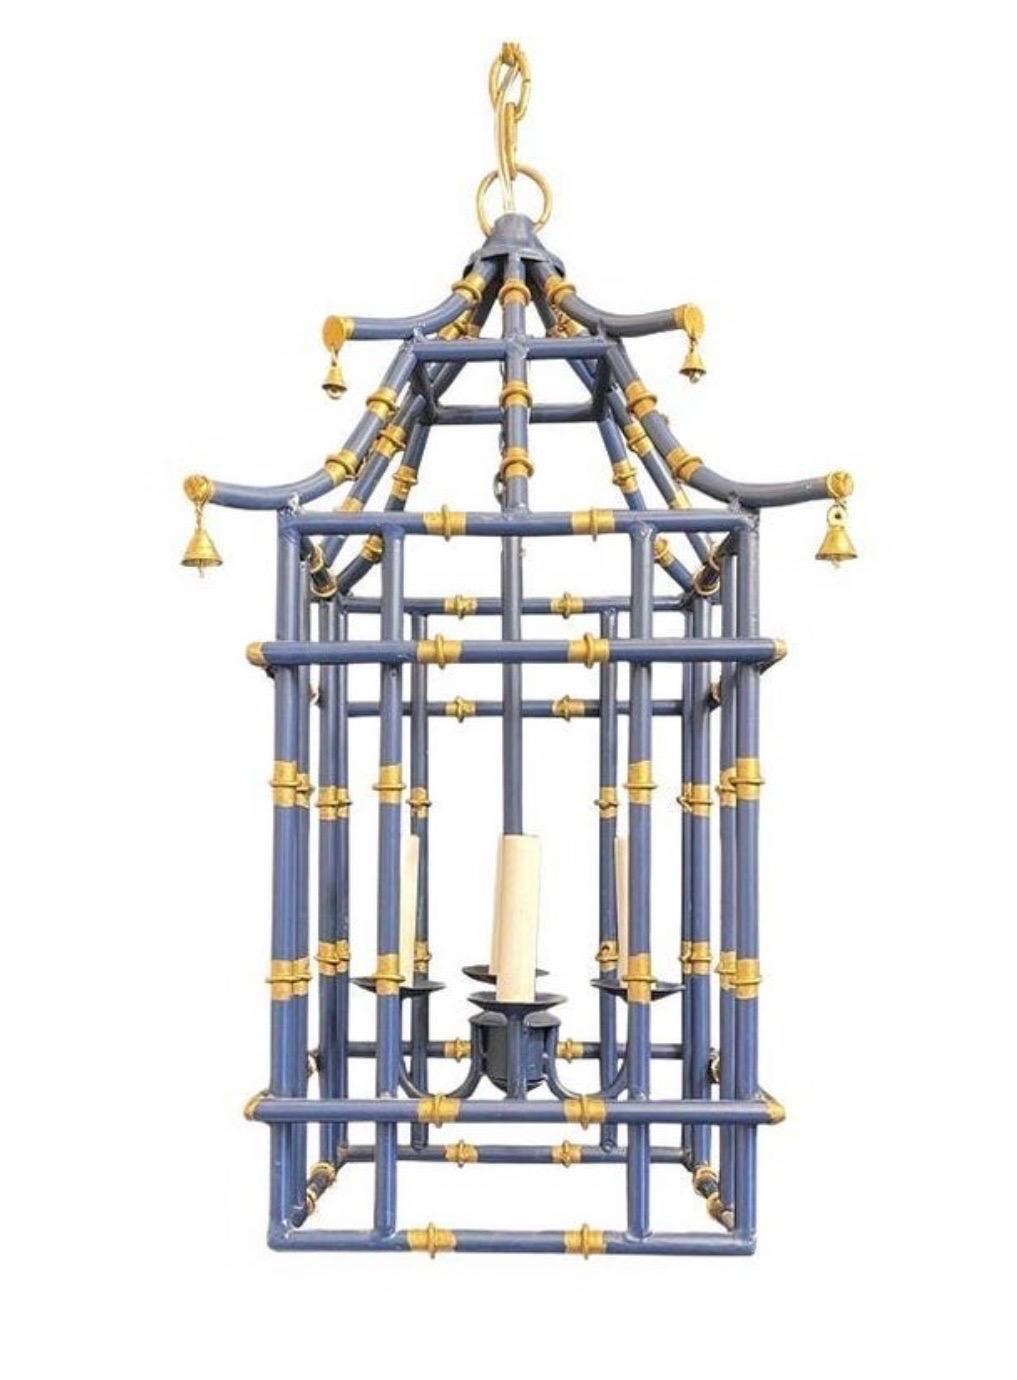 A wonderful medium sized navy blue & gold gilt pagoda bamboo form chinoiserie lantern fixtures with a 4 candelabra light clusters
Rewired and ready to install with chain canopy and mounting hardware.

Pair lanterns currently available
Each sold